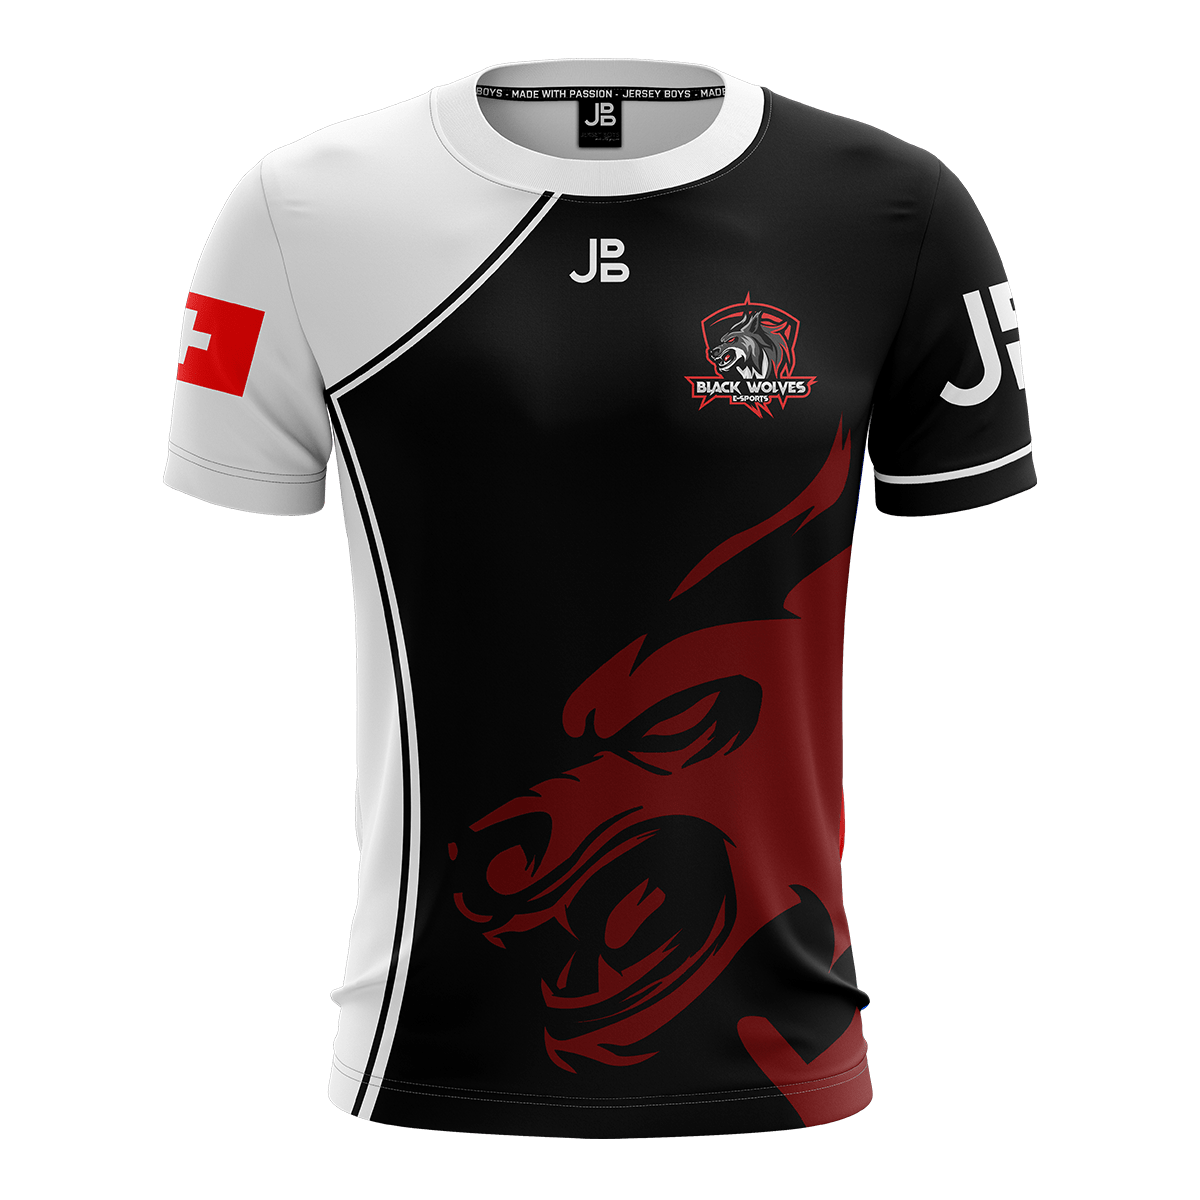 BLACK WOLVES E-SPORTS RED - Jersey 2020